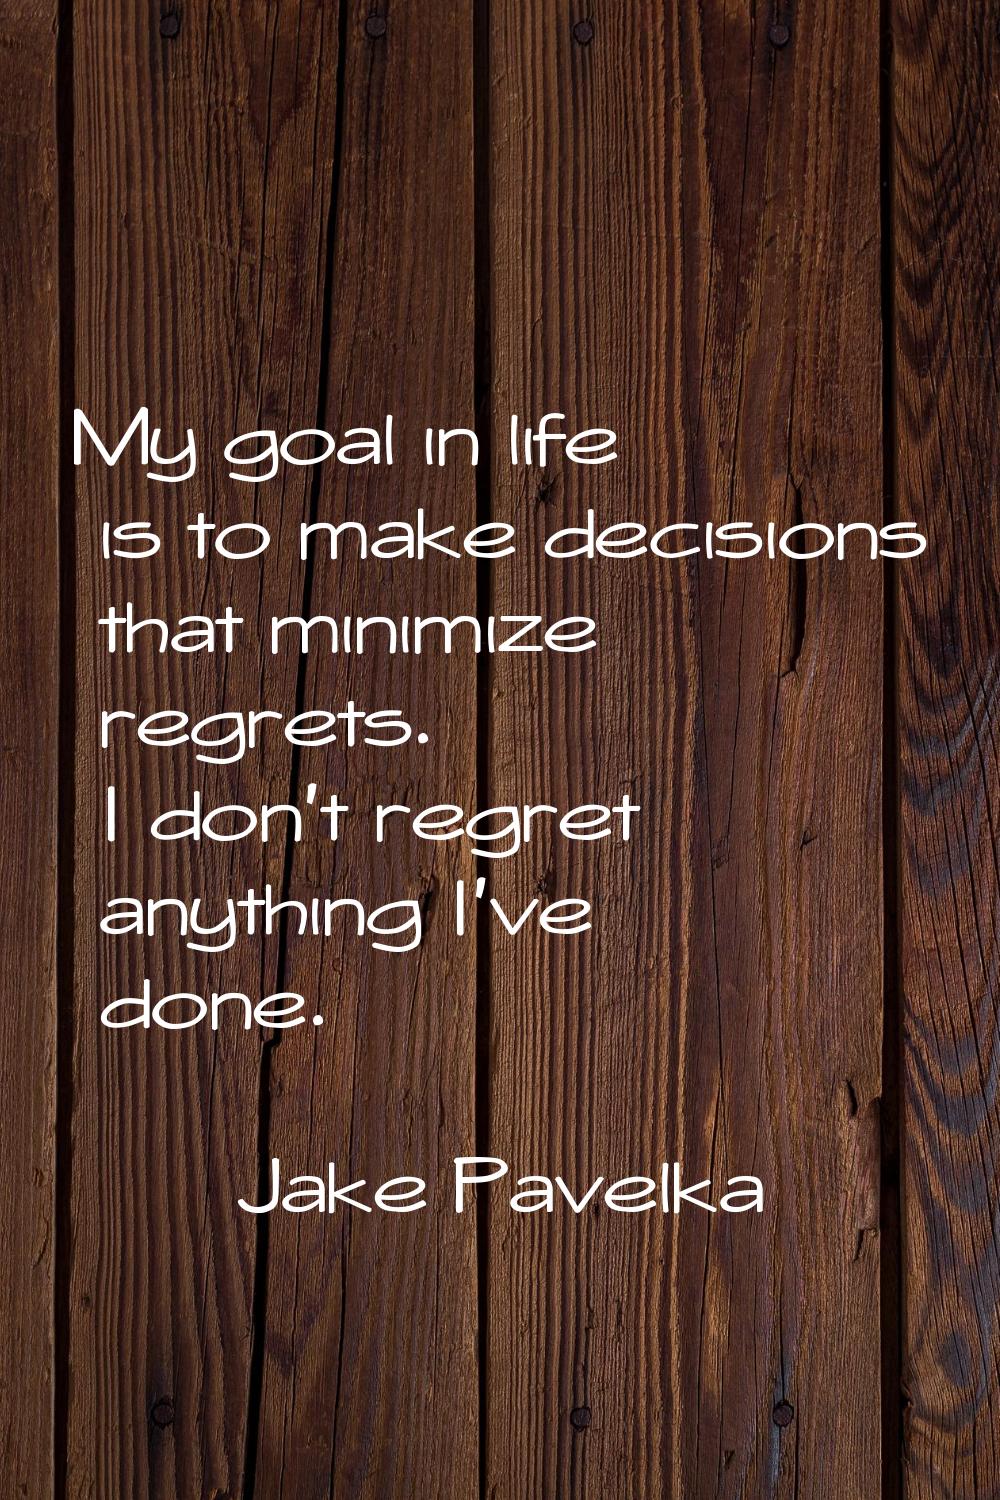 My goal in life is to make decisions that minimize regrets. I don't regret anything I've done.